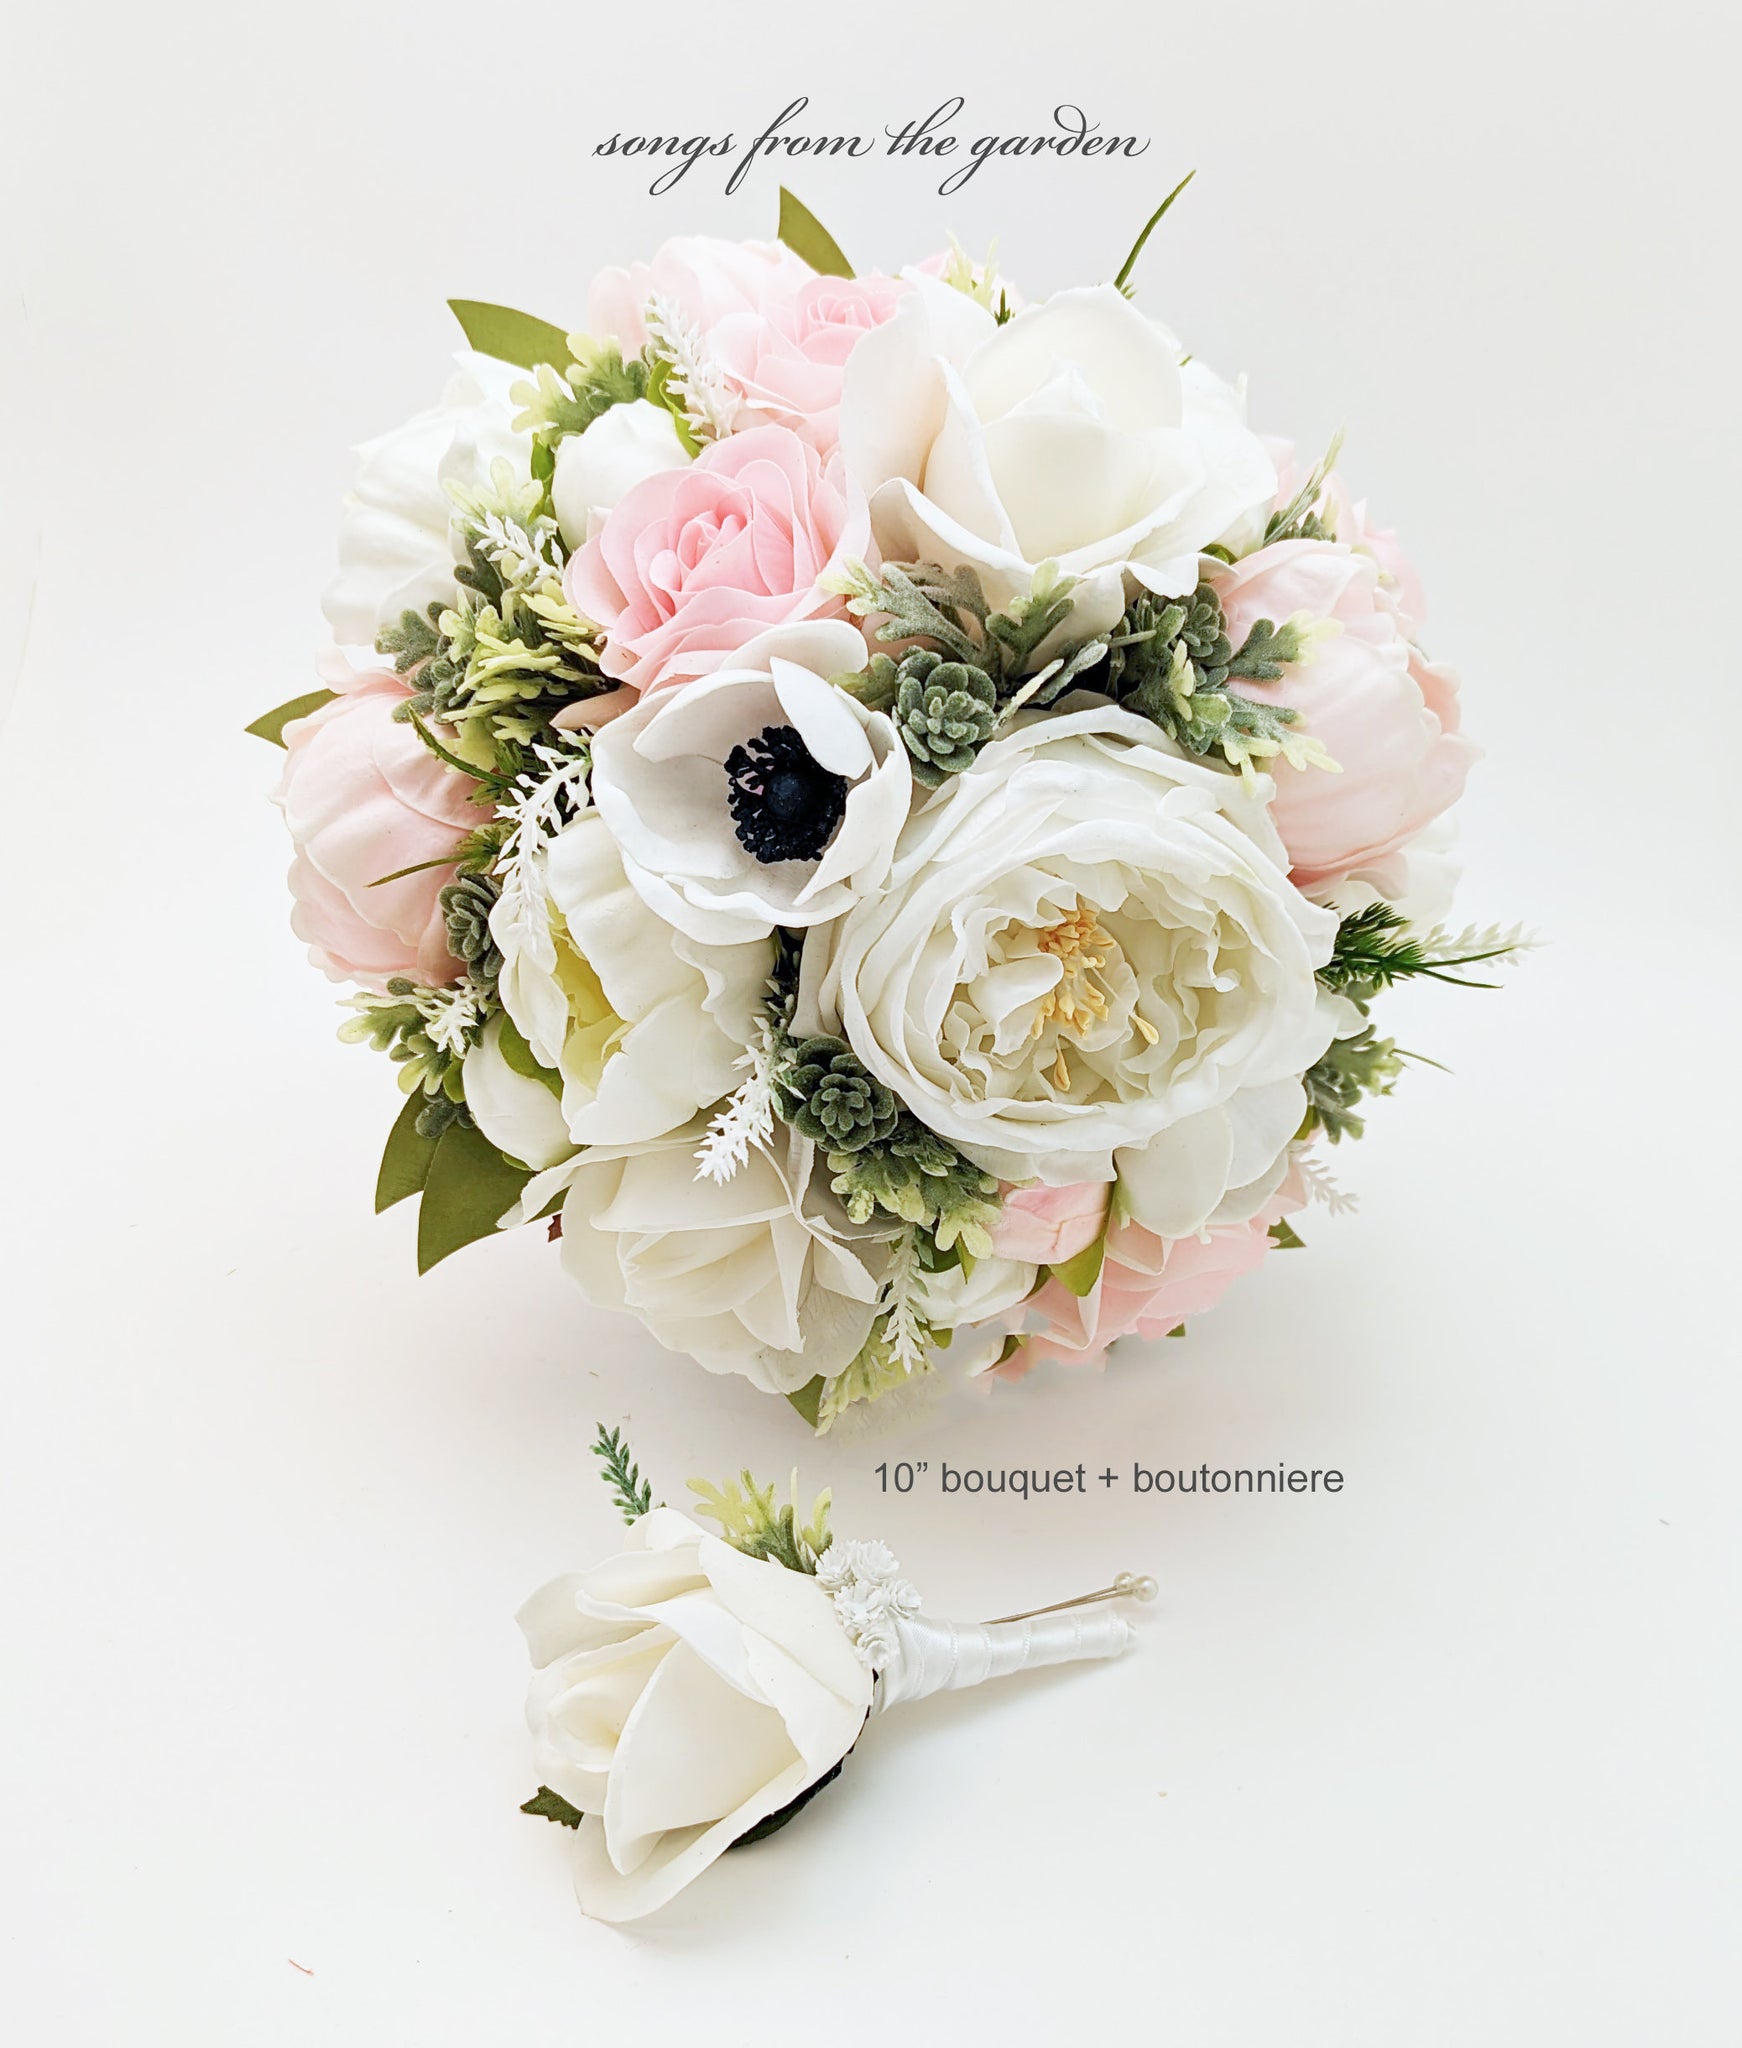 Blush Bridal or Bridesmaid Bouquet Succulents Peonies Cabbage Roses Anemones - Add Groom's Boutonniere Wedding Flower Halo Corsage More!